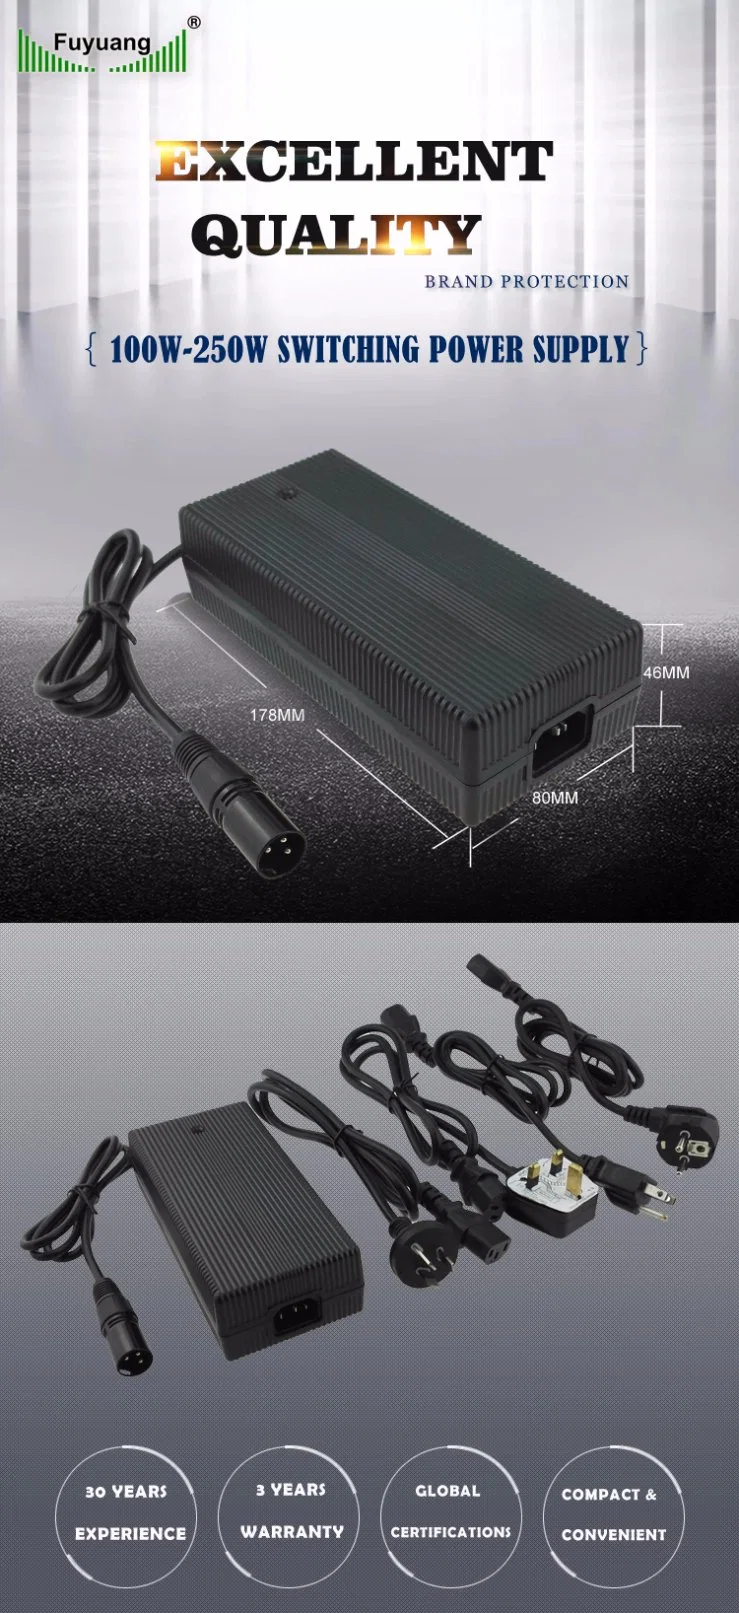 48V 1.5A Car Battery Charger DC to DC Power Supply